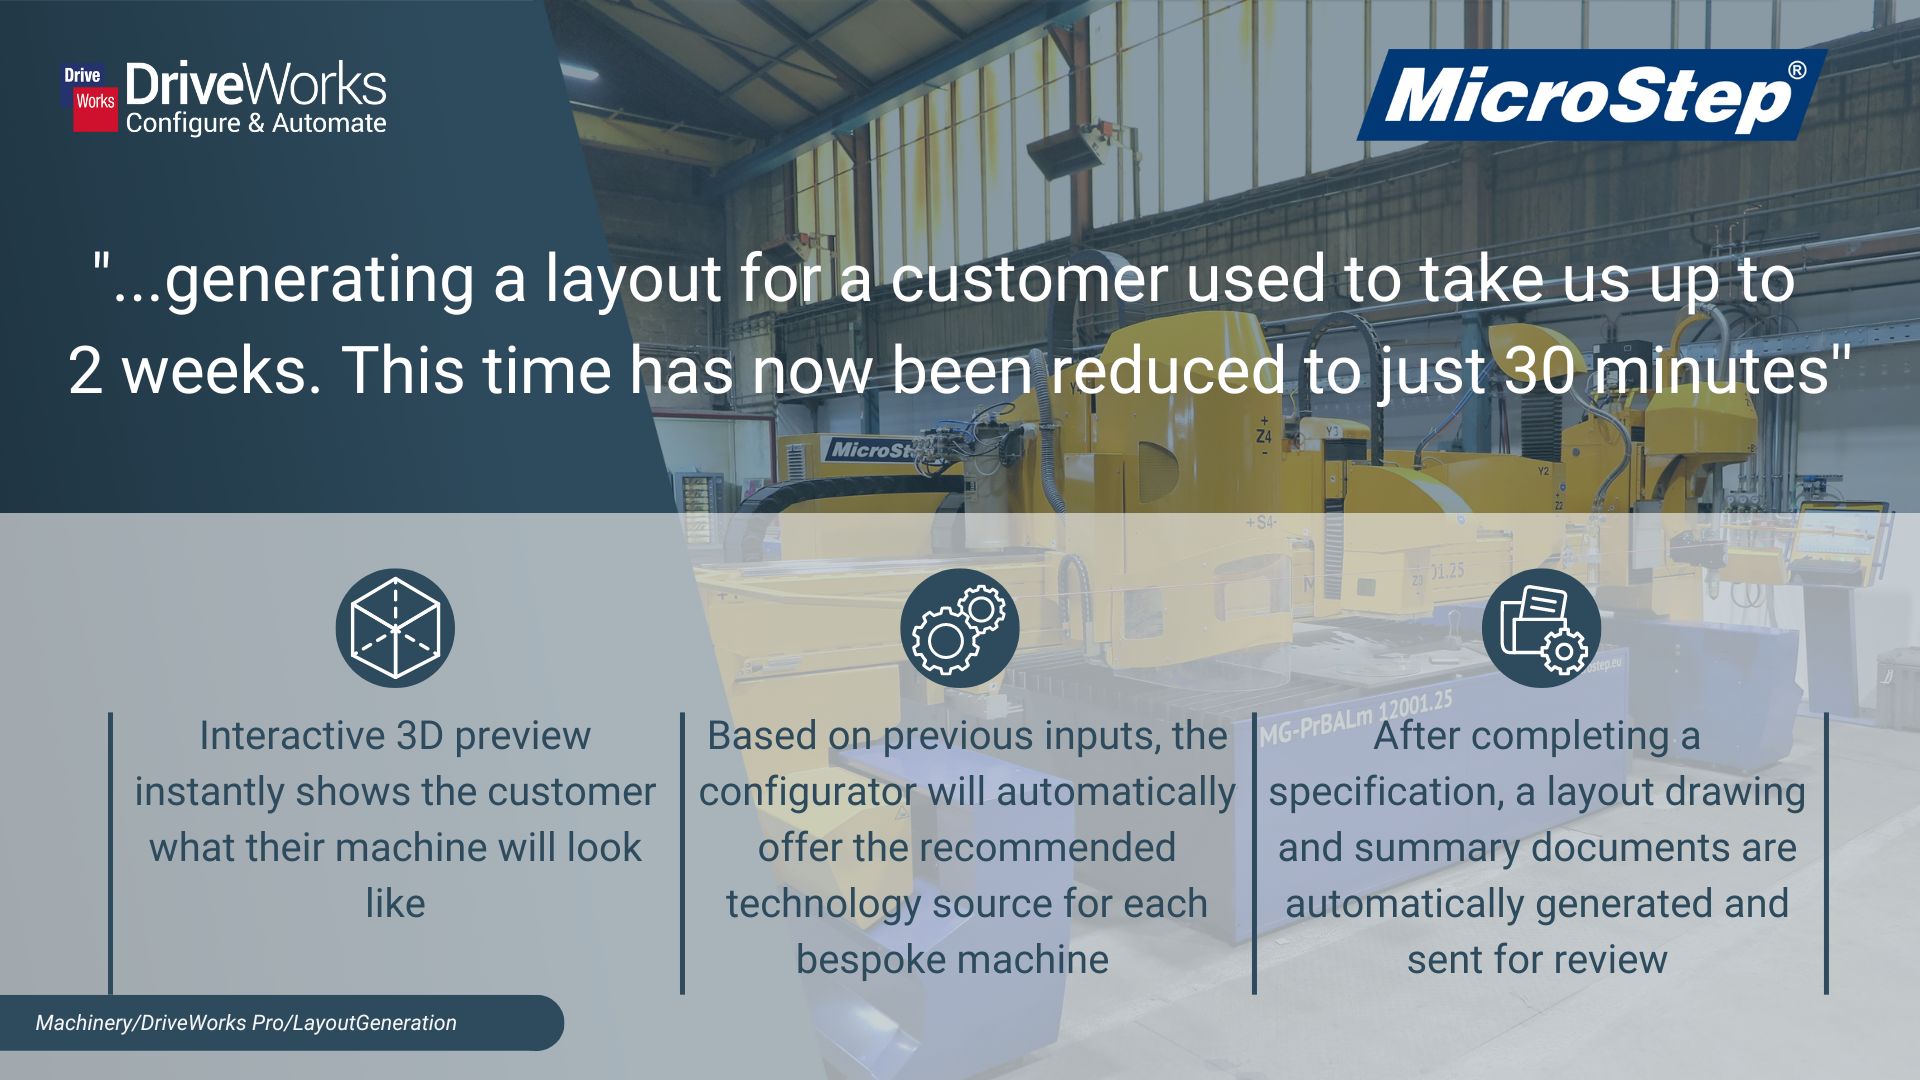 A picture with text on showing the benefits that Microstep has had since using DriveWorks. The text details: generating a layout for a customer used to take us up to 2 weeks. This time has now been reduced to just 30 minutes, Interactive 3D preview instantly shows the customer what their machine will look like, Based on previous inputs, the configurator will automatically offer the recommended technology source for each bespoke machine, After completing a specification, a layout drawing and summary documents are automatically generated and sent for review.